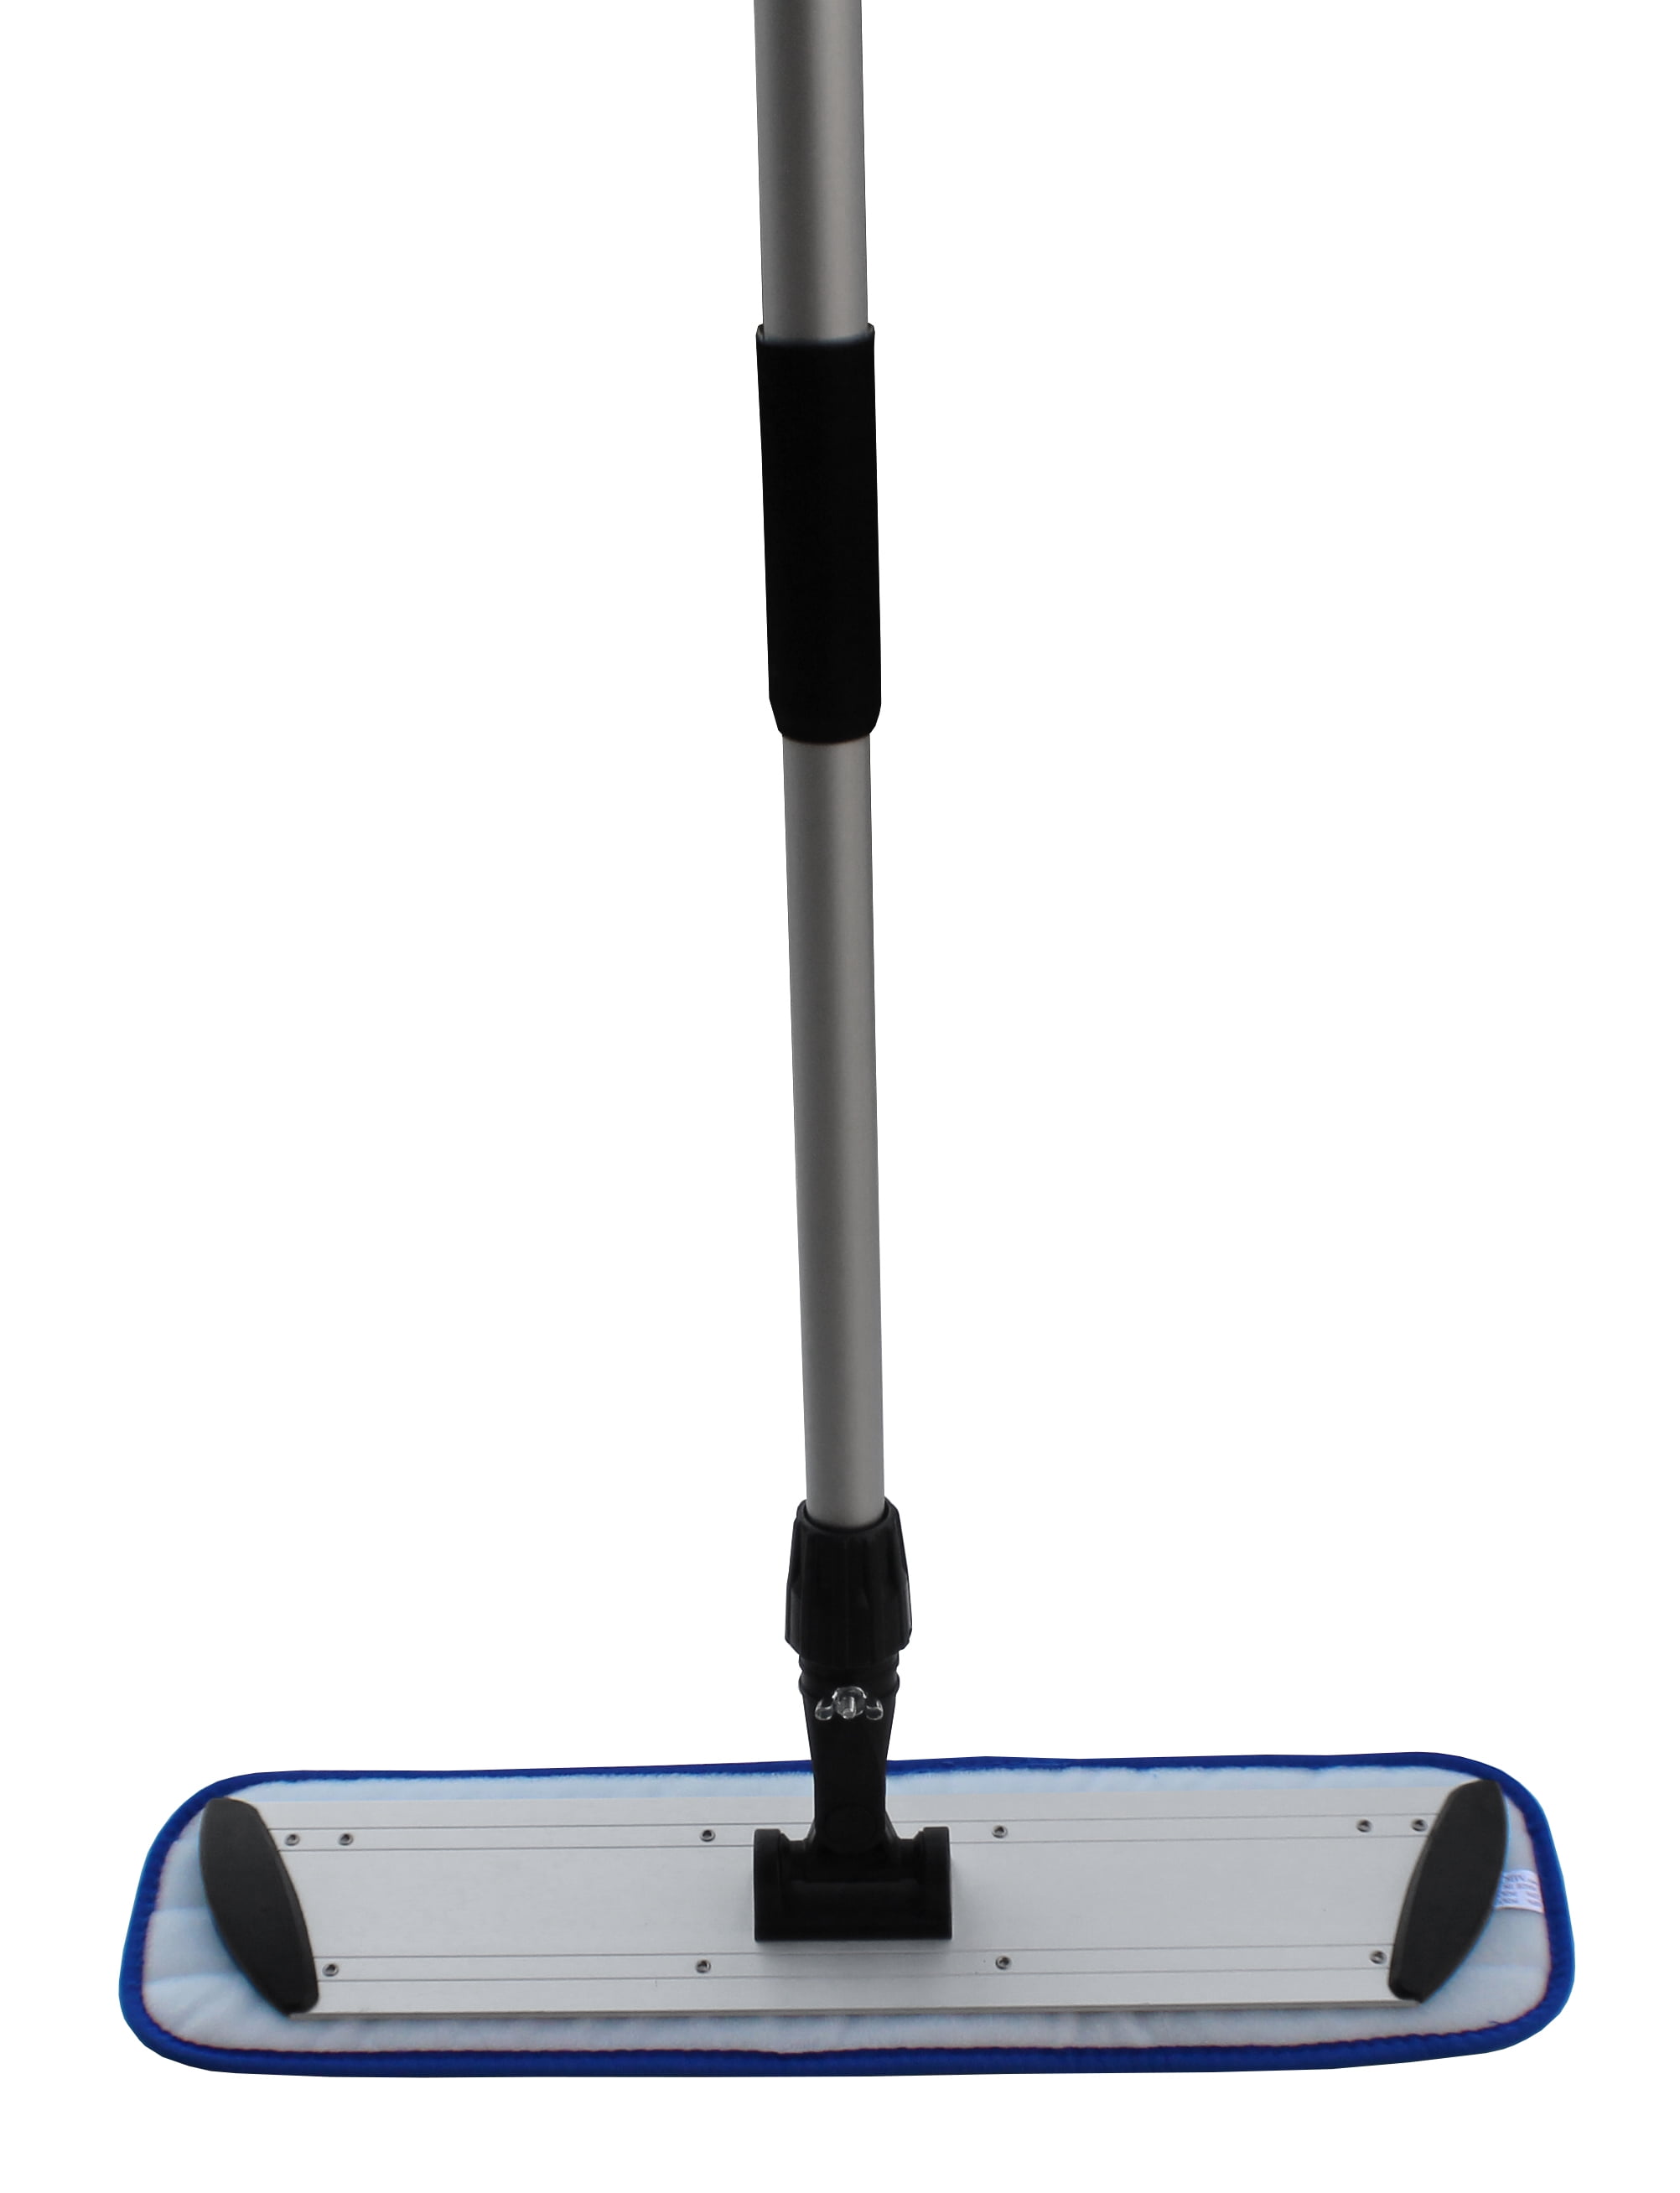 Swivel Mop Base with 2 Covers Free Shipping! New Microfiber Mop Kit 8"x15" 